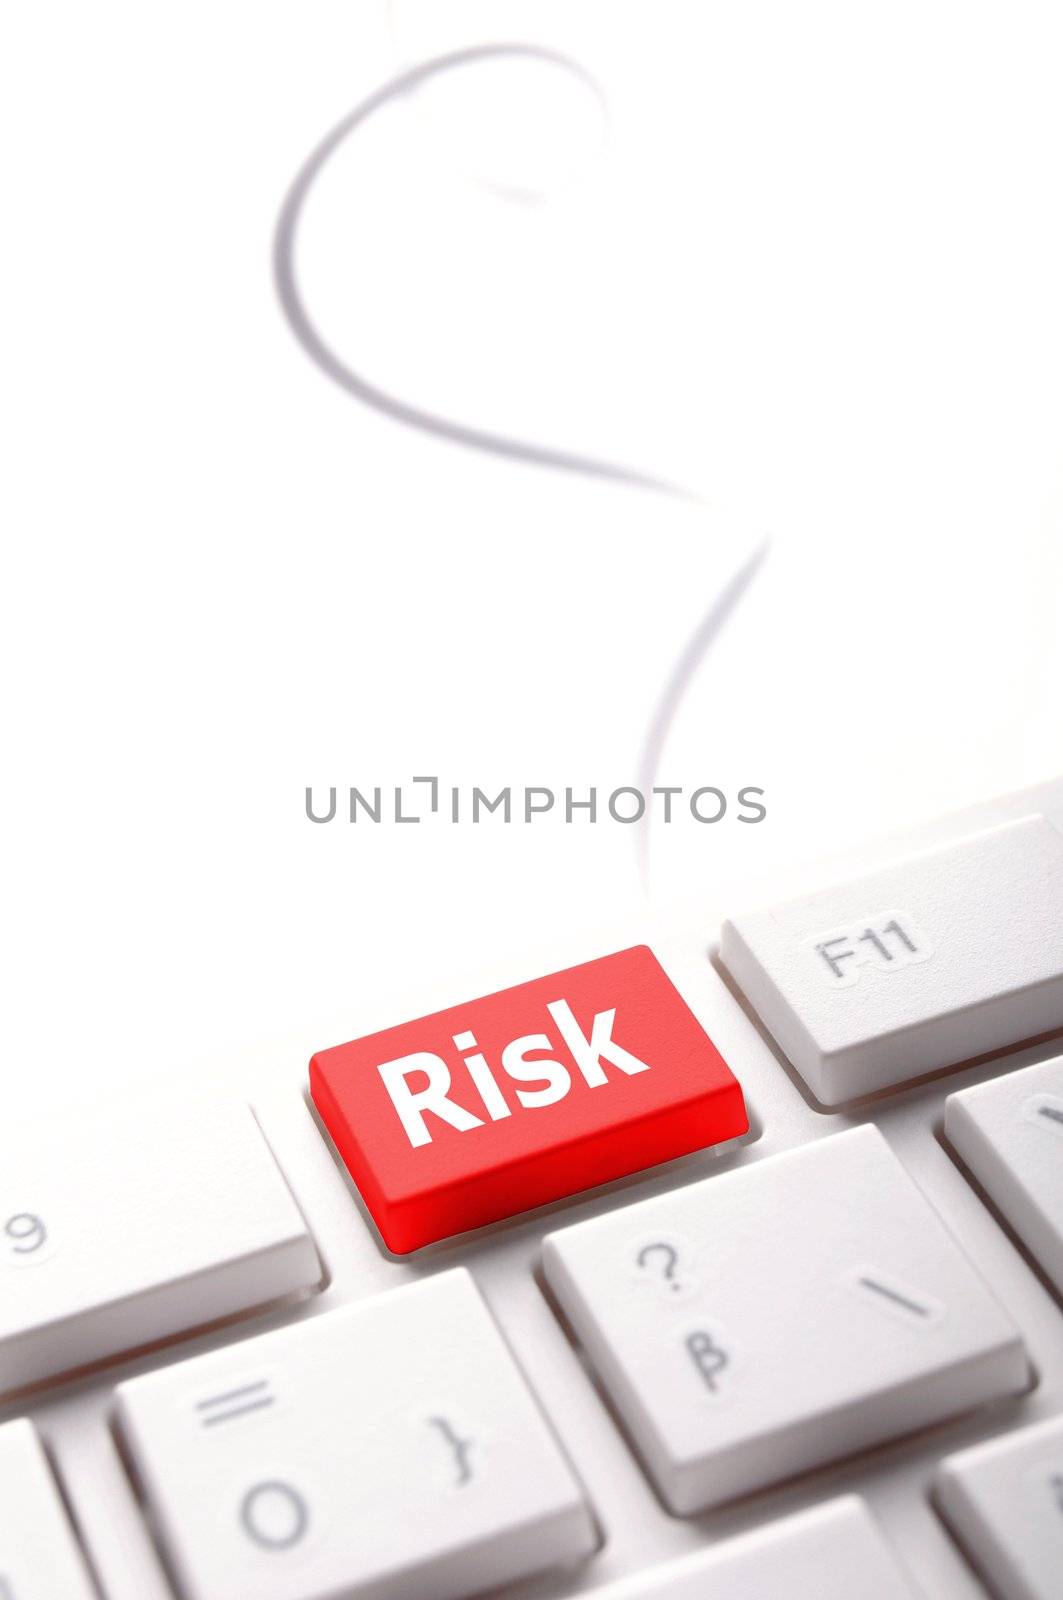 risk management concept with word on key showing risky investment